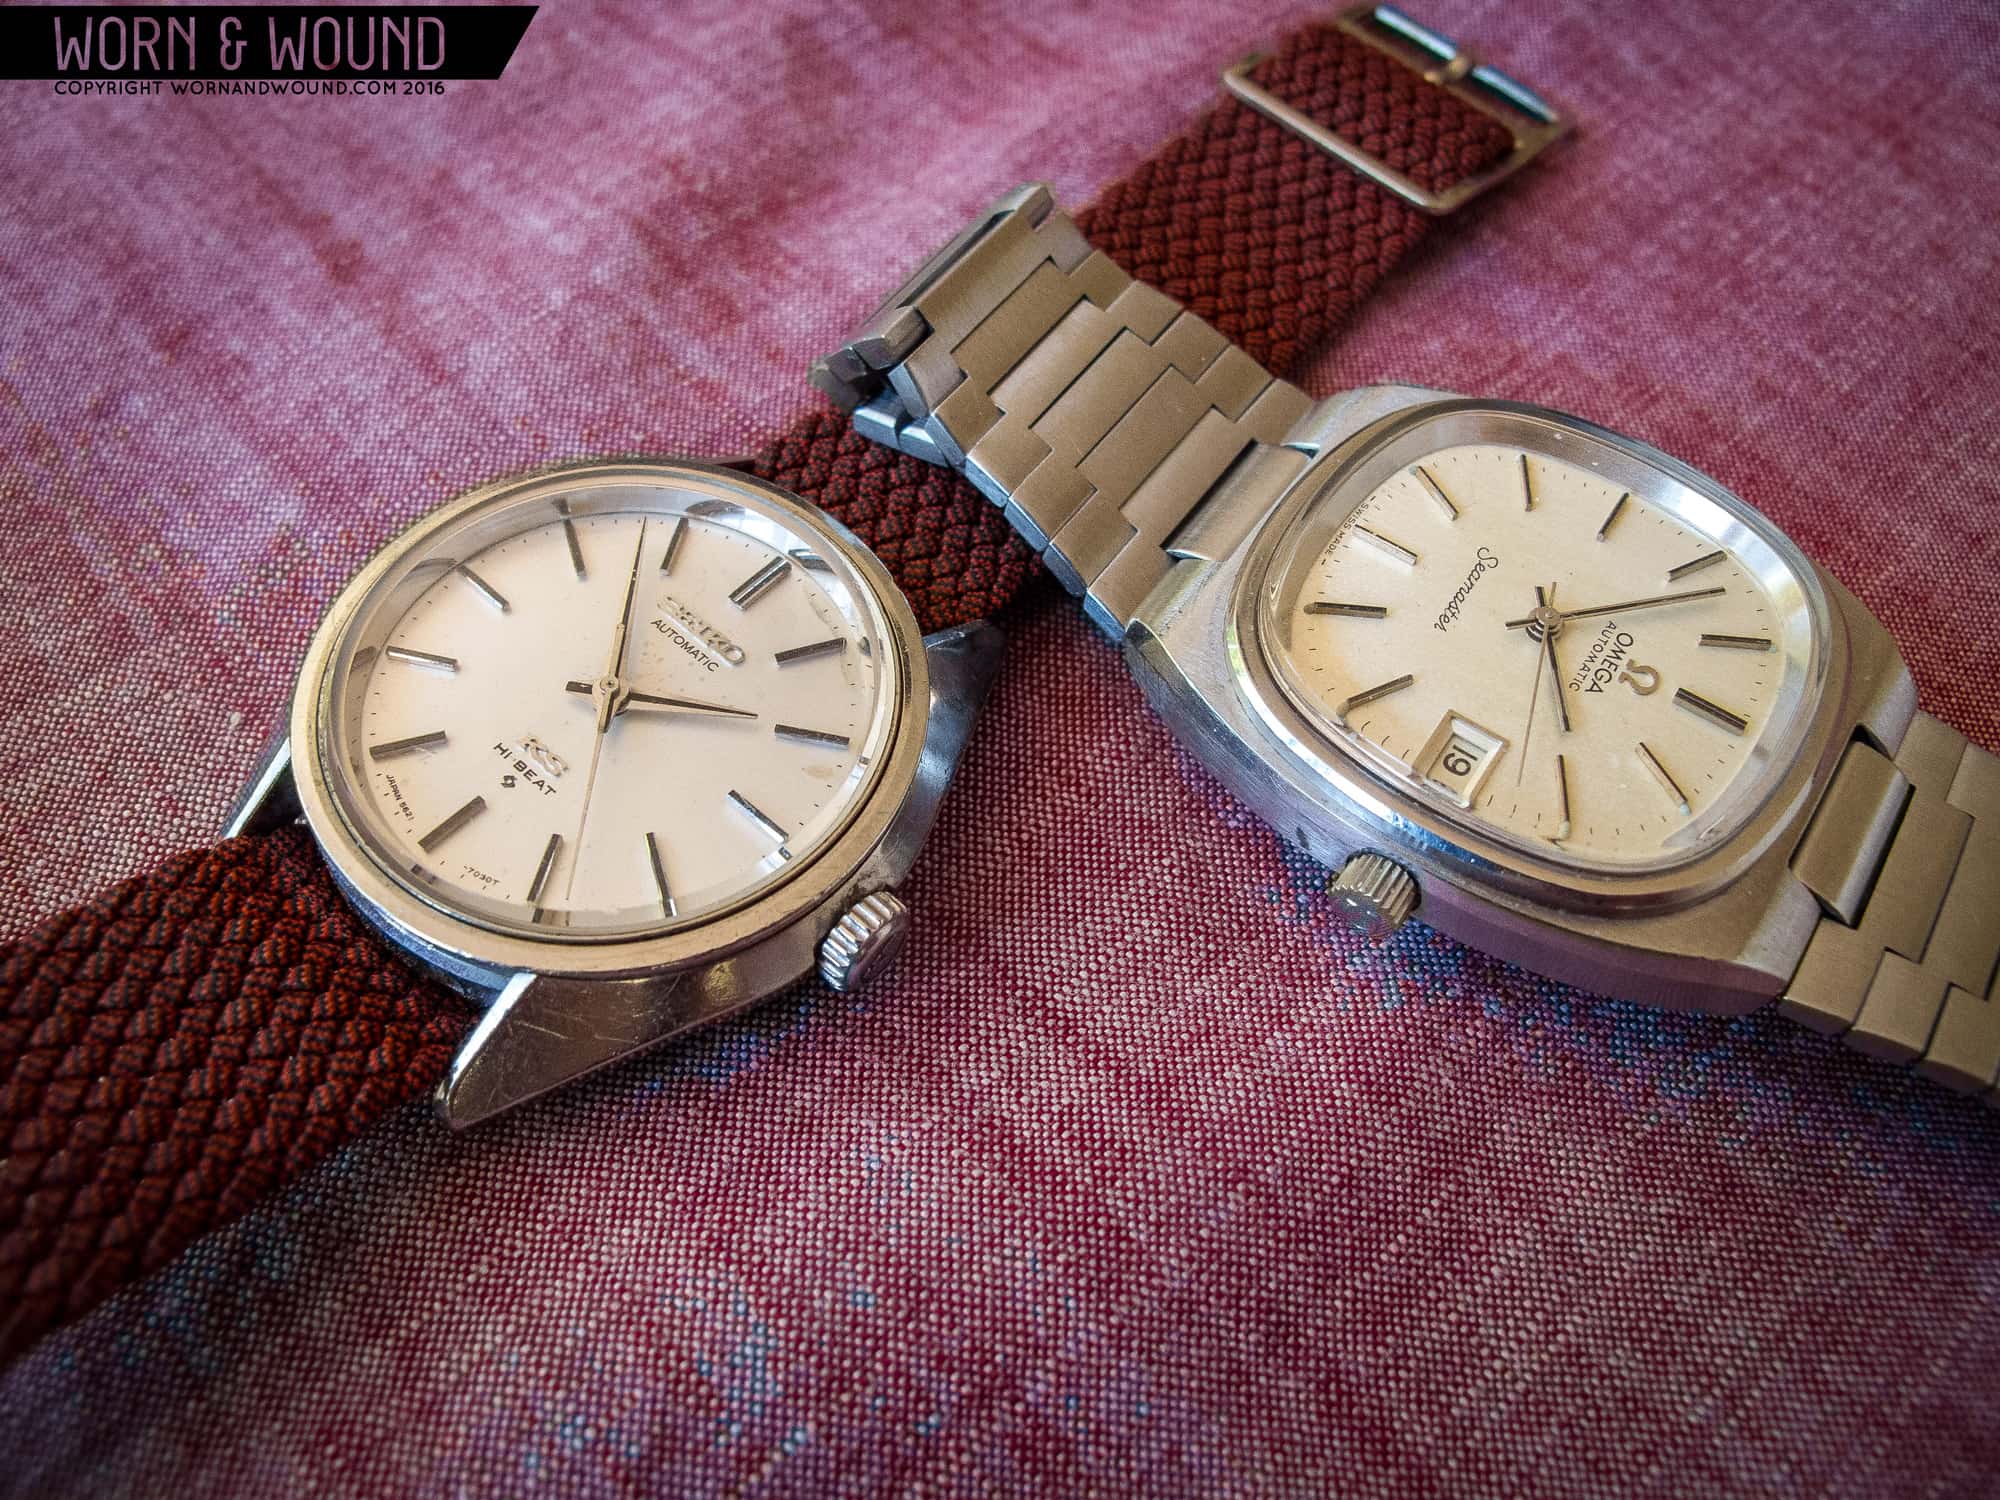 Affordable Vintage: Head-to-Head With the Omega Seamaster ref. 166.0240 and King Seiko ref. 5621-7030